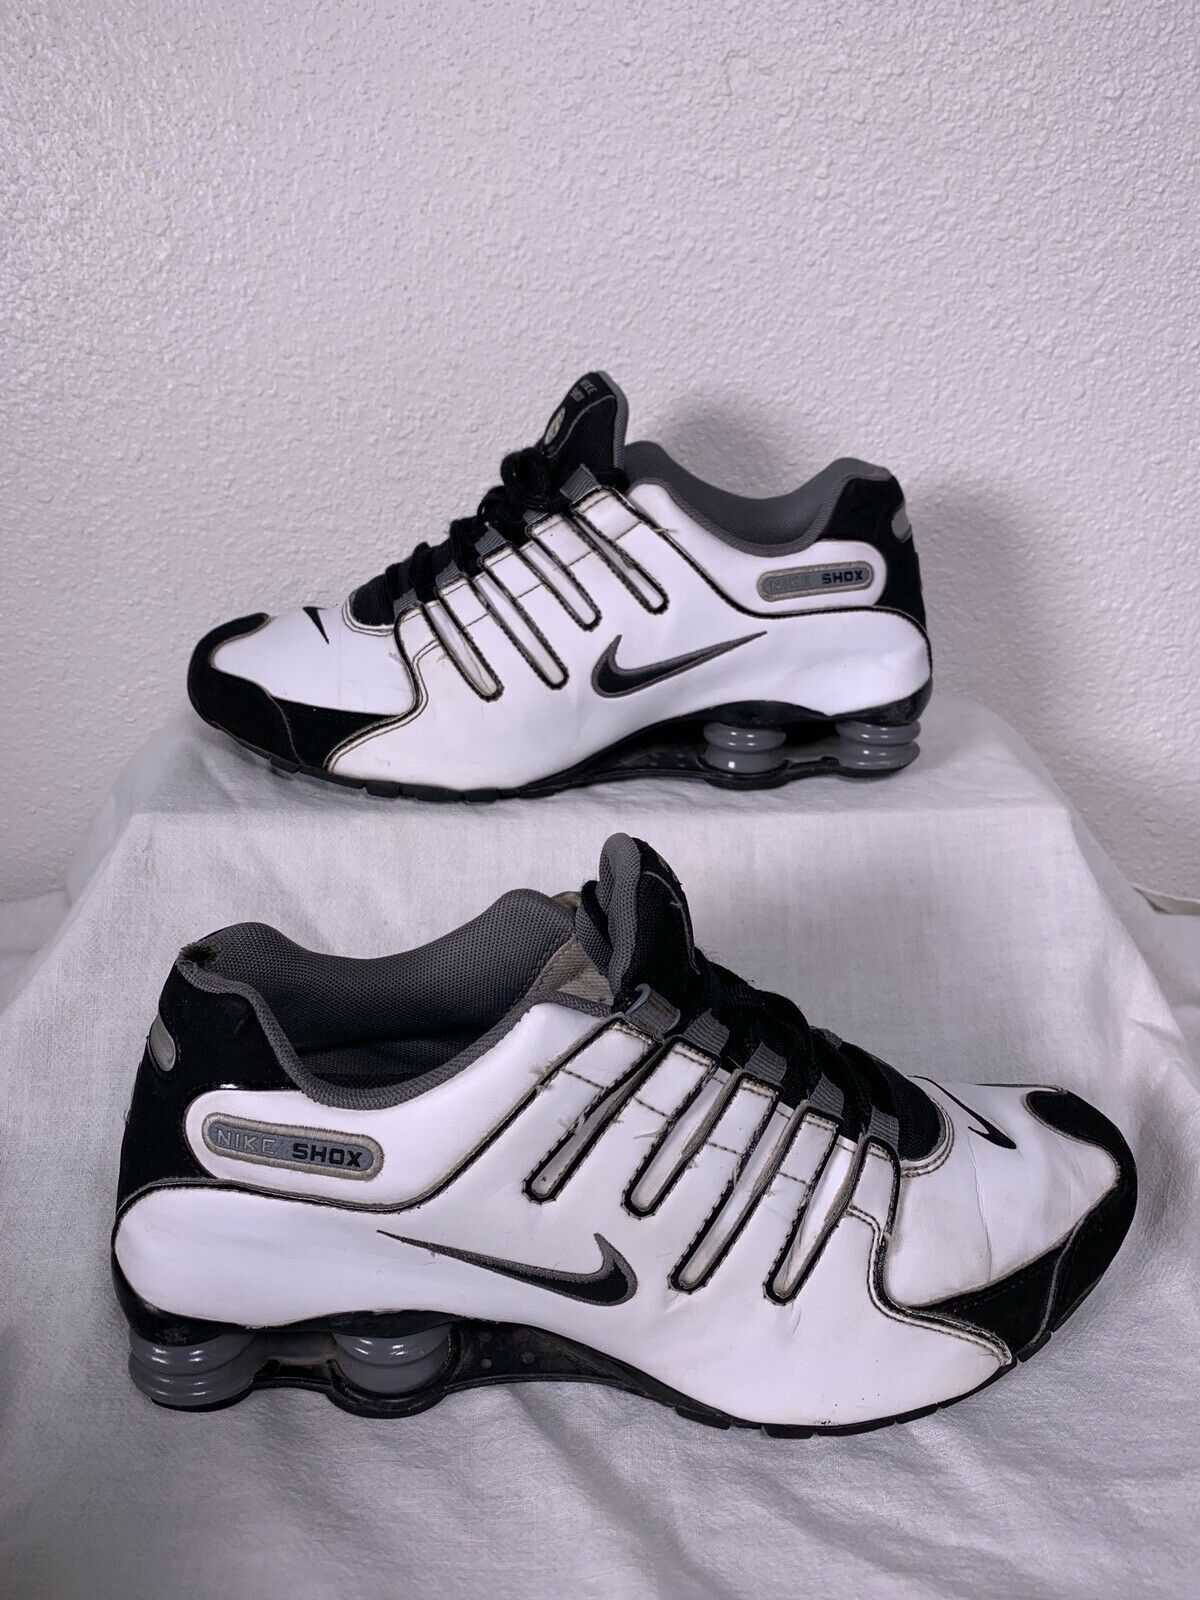 Nike Shox NZ Men’s Size 9.5 White Black Casual Athletic Running Shoes 378341-101